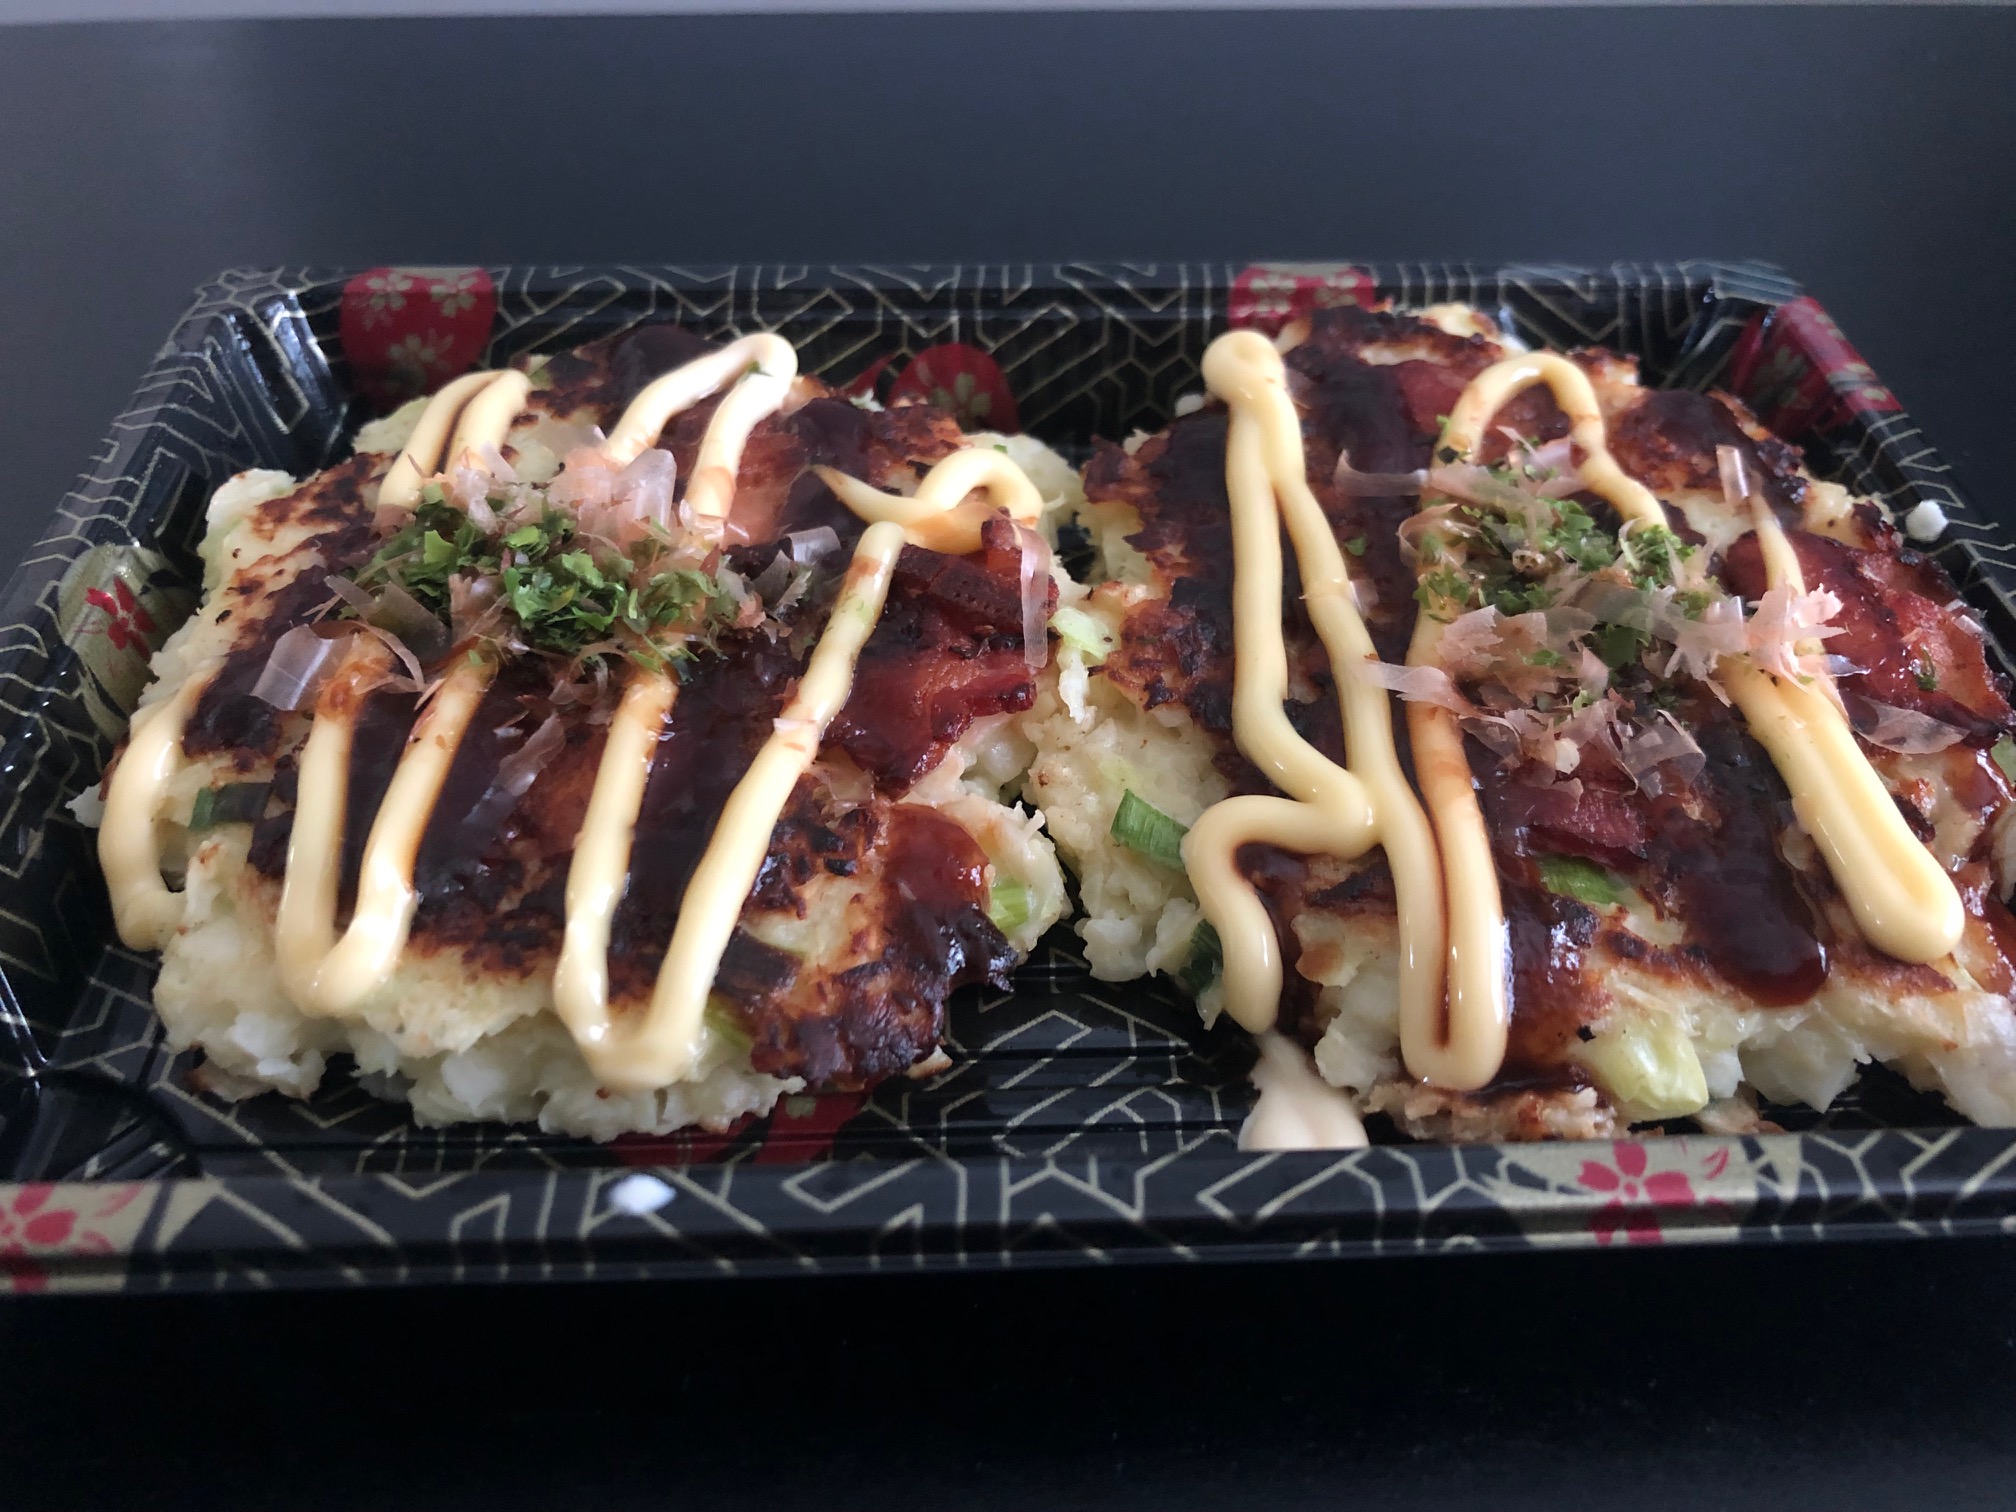 Two okonomiyaki are in a rectangular container with drizzles of yellow and dark brown sauces. Photo by Alyssa Buckley.